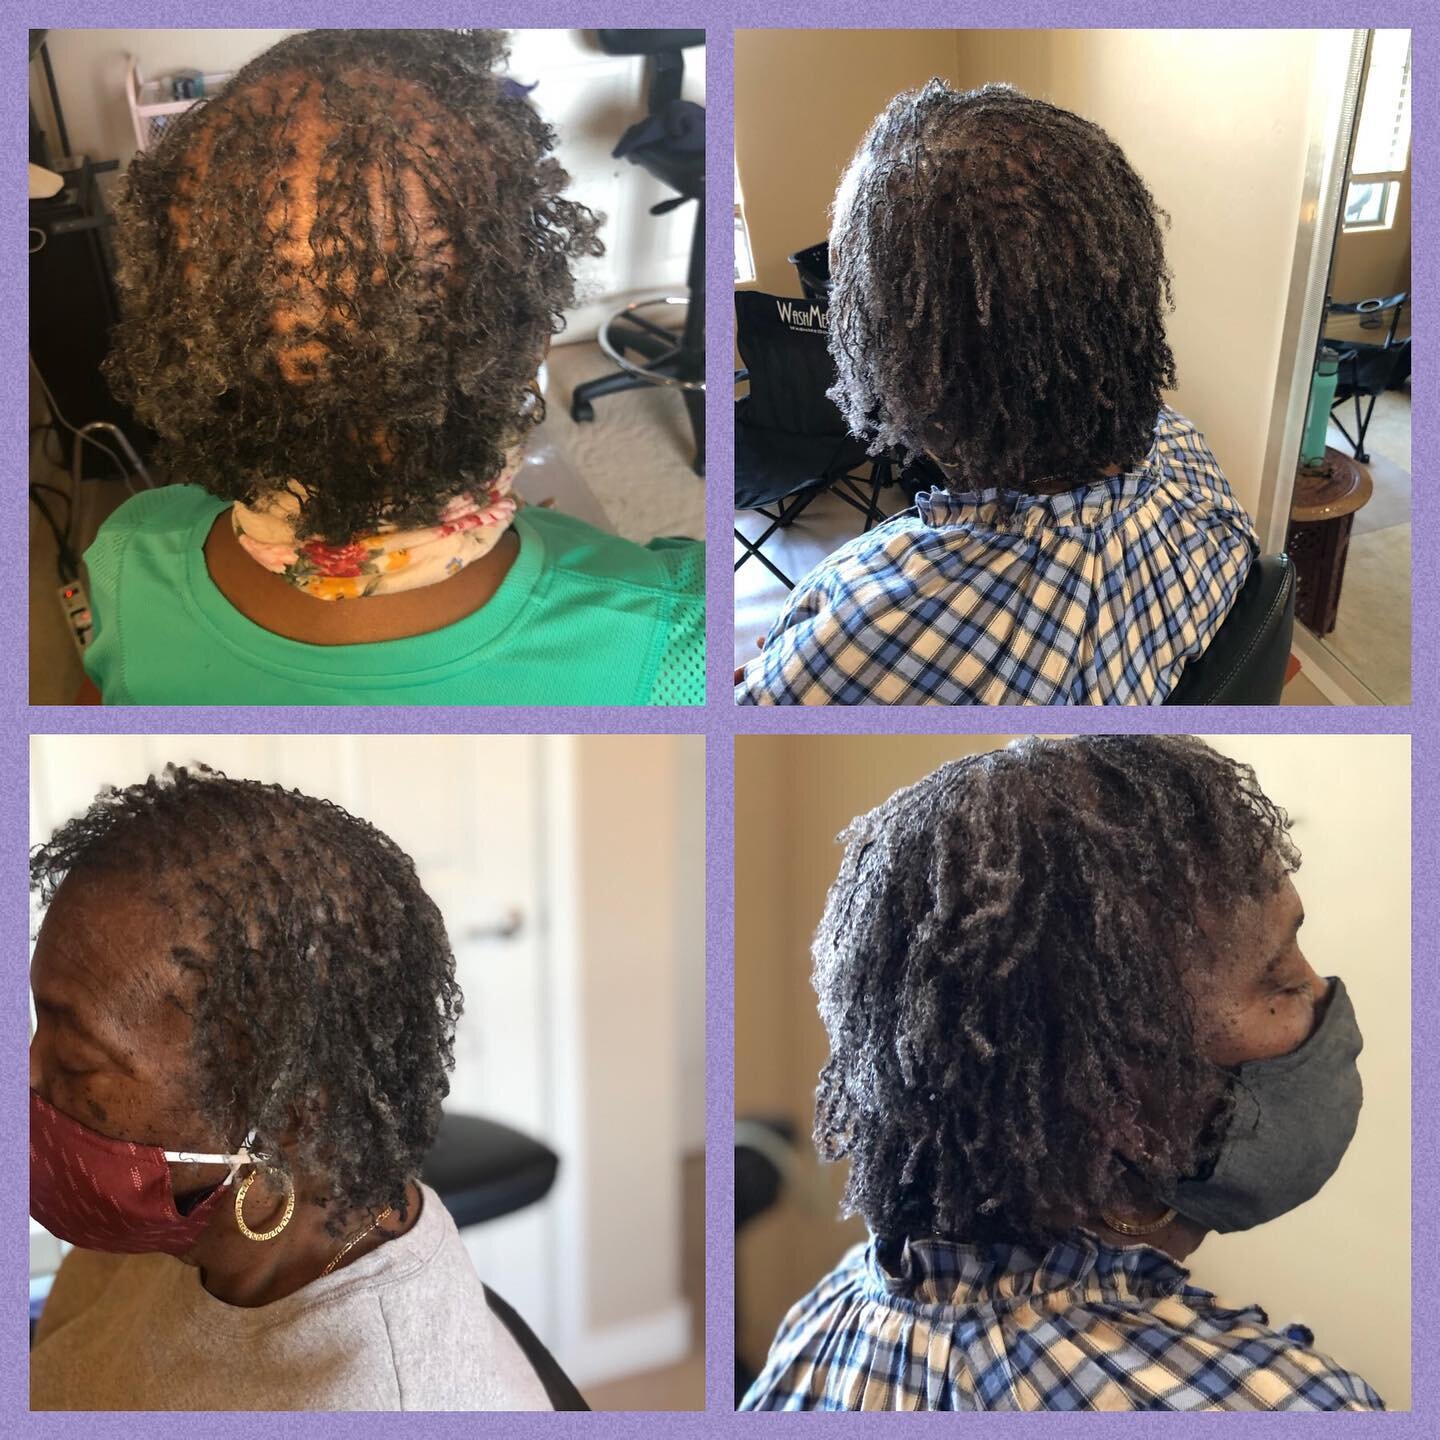 Progress pictures for fine hair. The pictures on the right are 8months after the install #phoenixsisterlocks #sisterlocksinphoenix #sisterlocksarizona #sisterlocksaz #sisterlocksfinehair